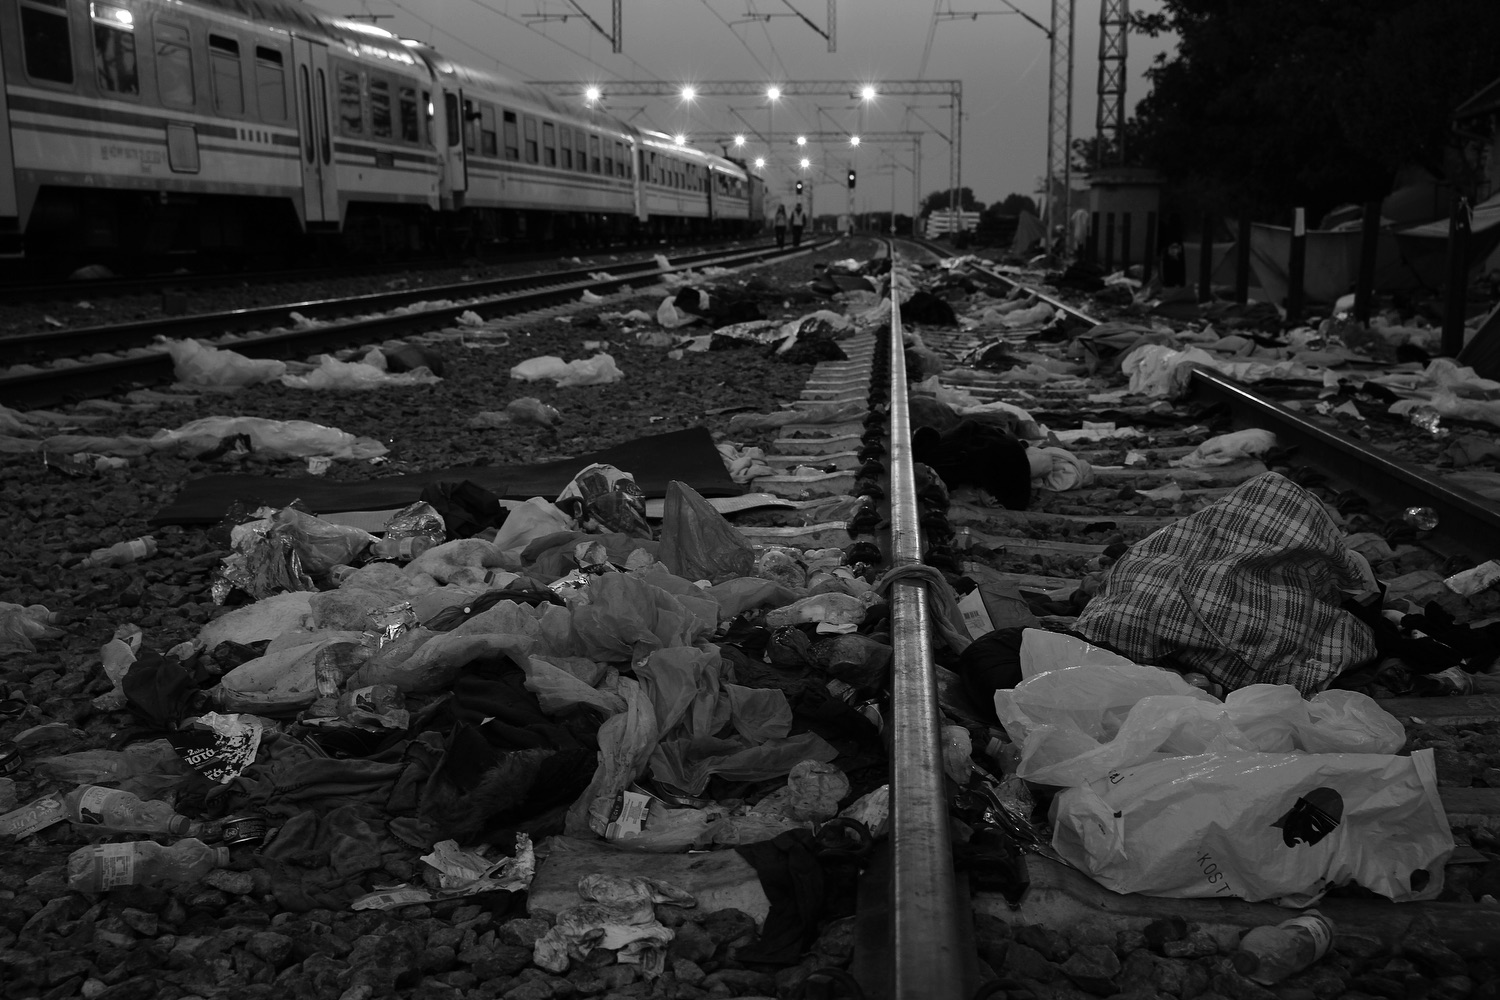 At the train station in  Tovarnik, Croatia refugees camped on the train tracks leaving debris behind, Sept. 21, 2015.